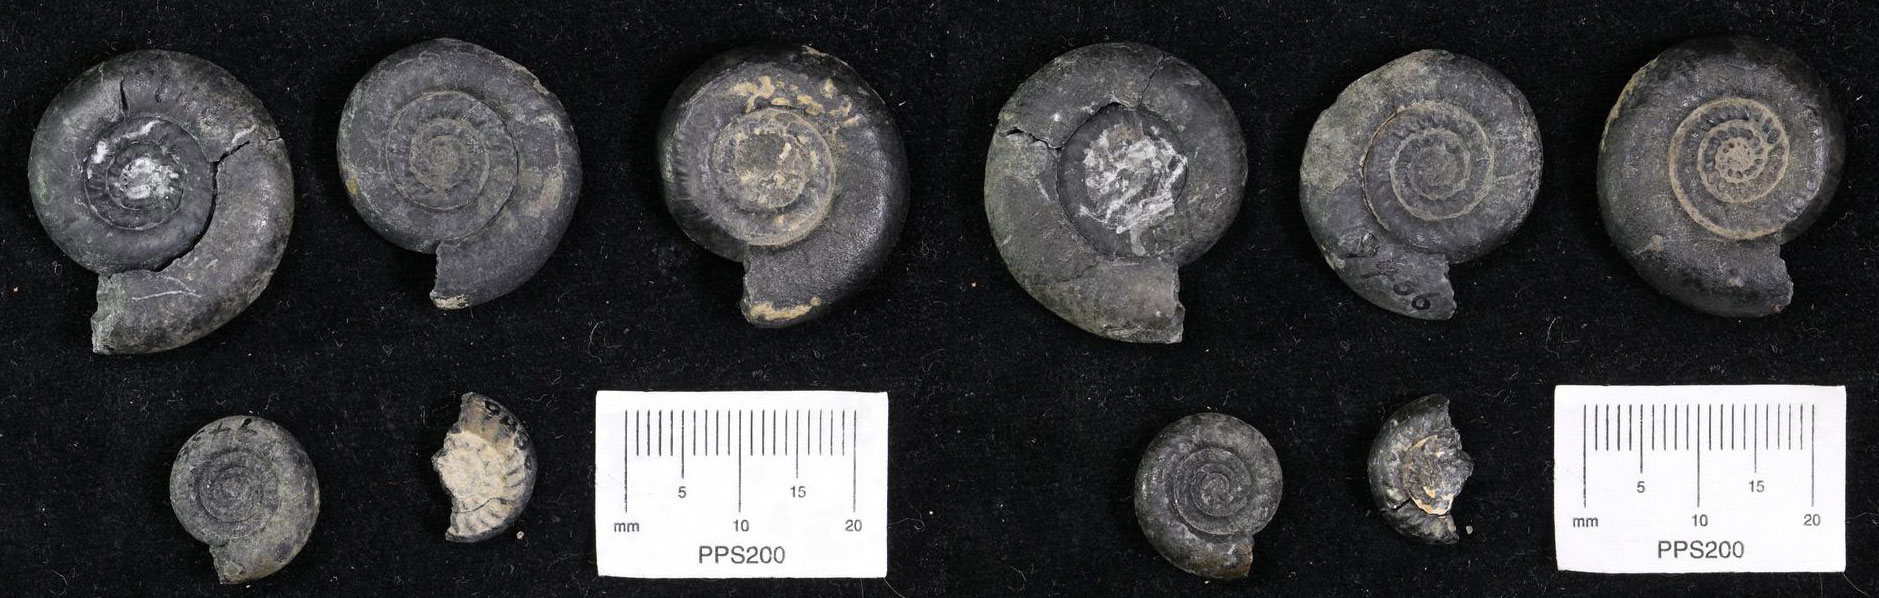 Photographs of 5 ammonoid shells from the Middle Triassic of Nevada. Each of the shells is black and coils in a single plane. The shells are small (slightly more than 2 centimeters or less). Shells are shown from one side in the first image, from the other side in the second. The shells have no obvious ornamentation.